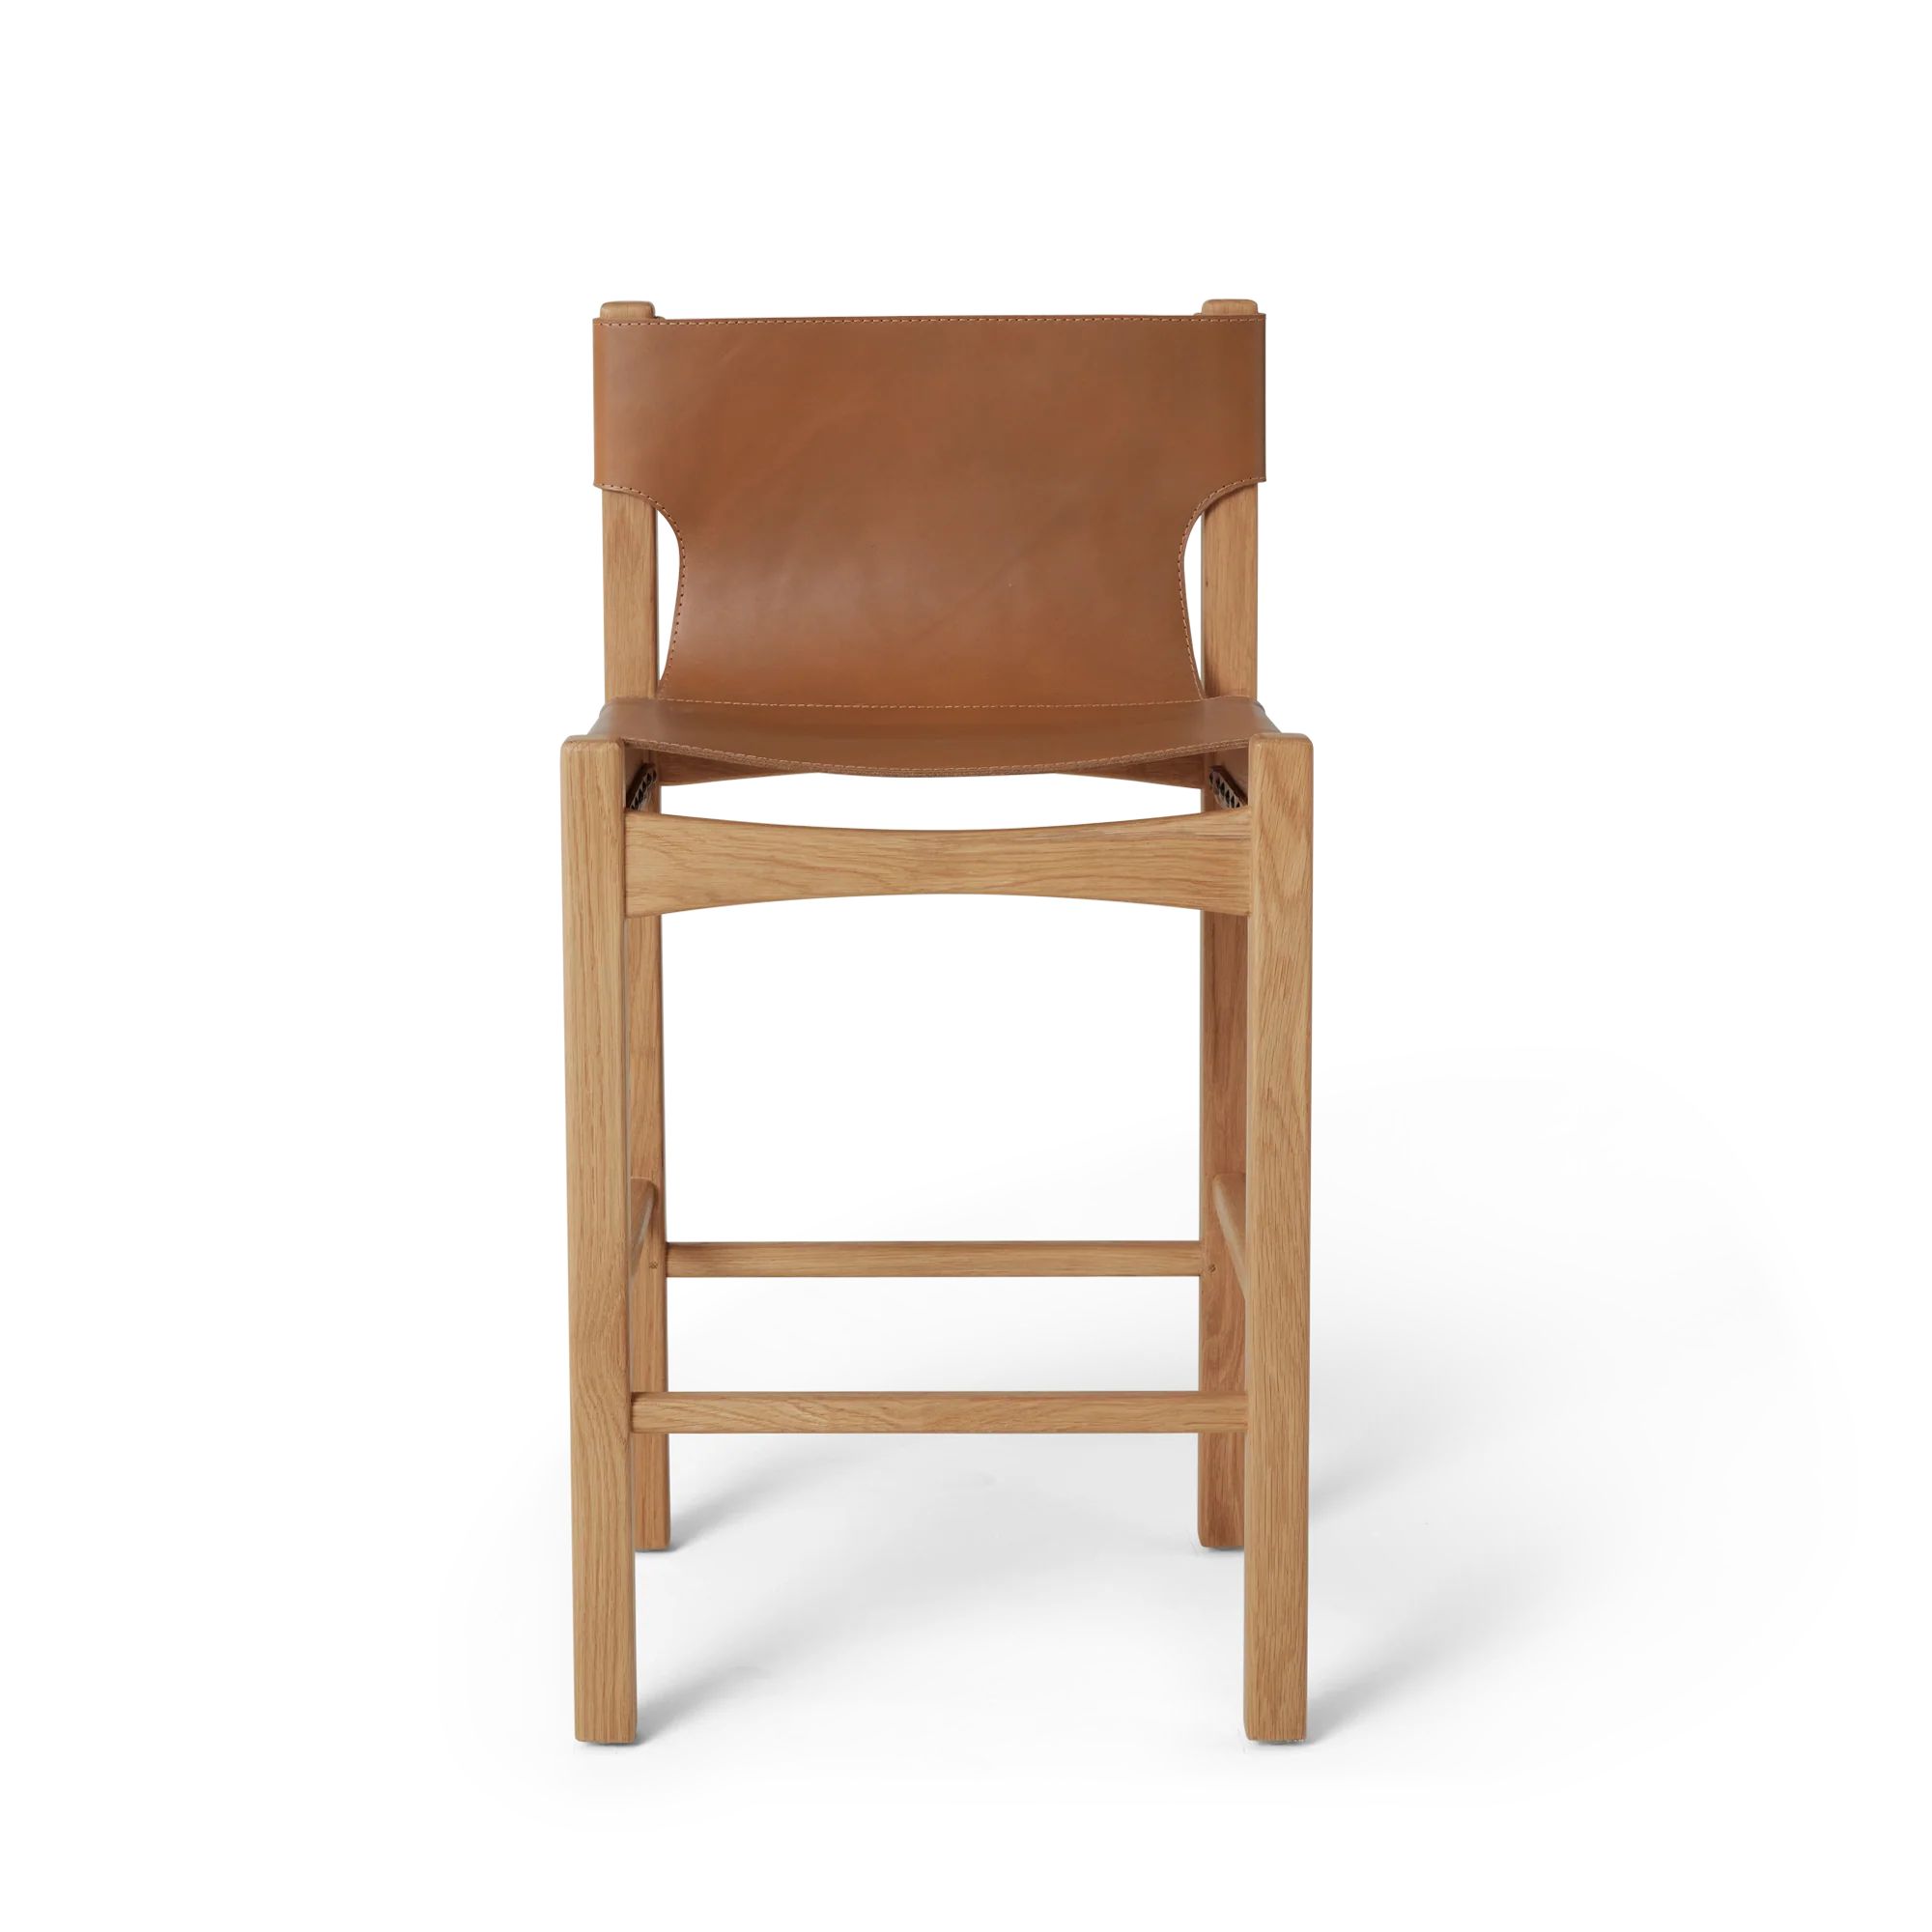 henrik counter stool - Timeless lines, enduring materials, and muted tones ground your space for ... | Hati Home